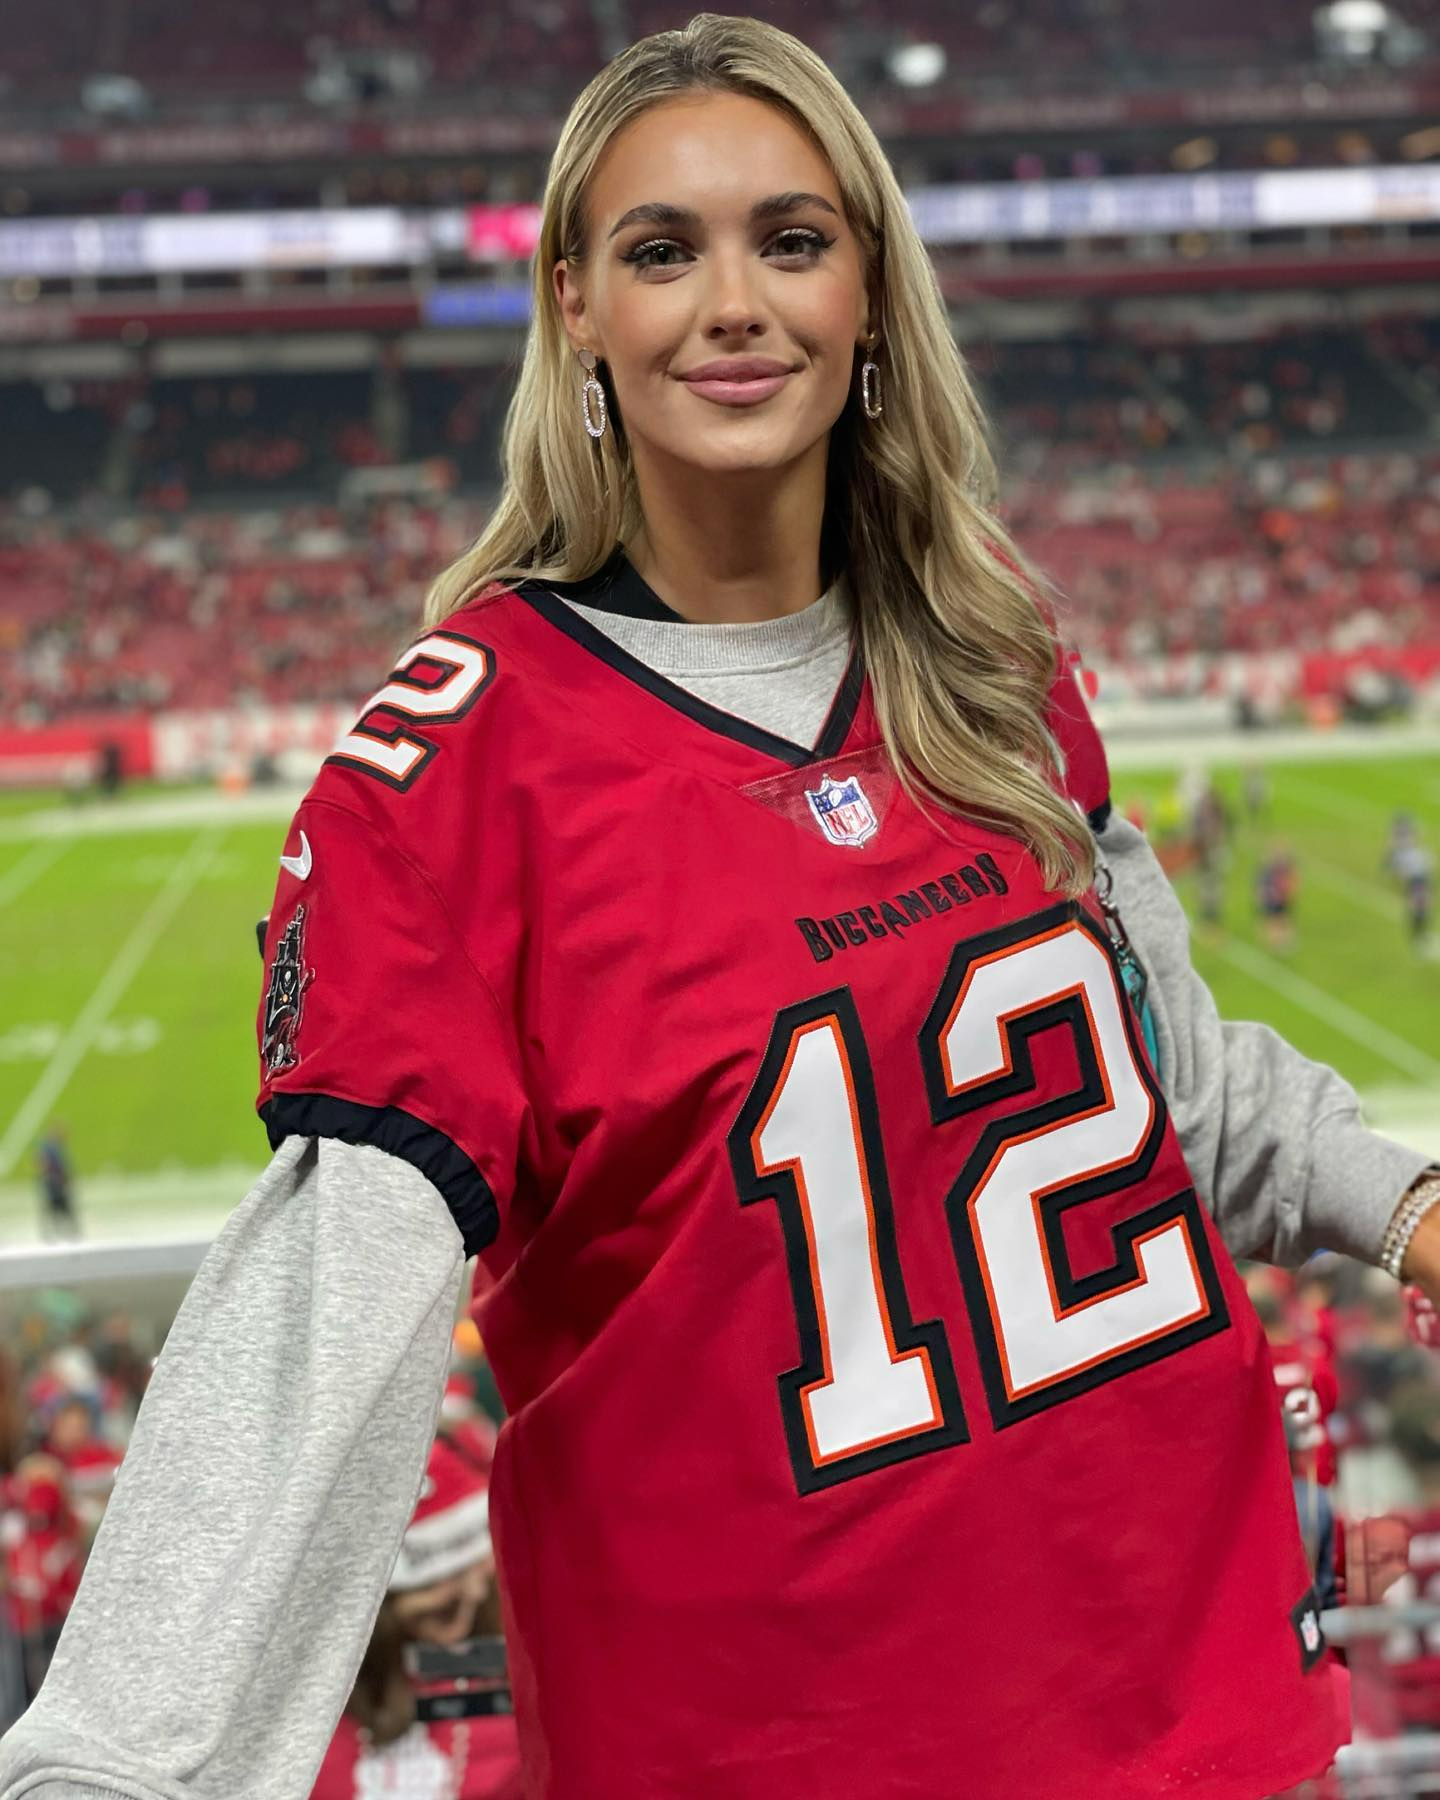 She went viral in December after posing in a Brady jersey